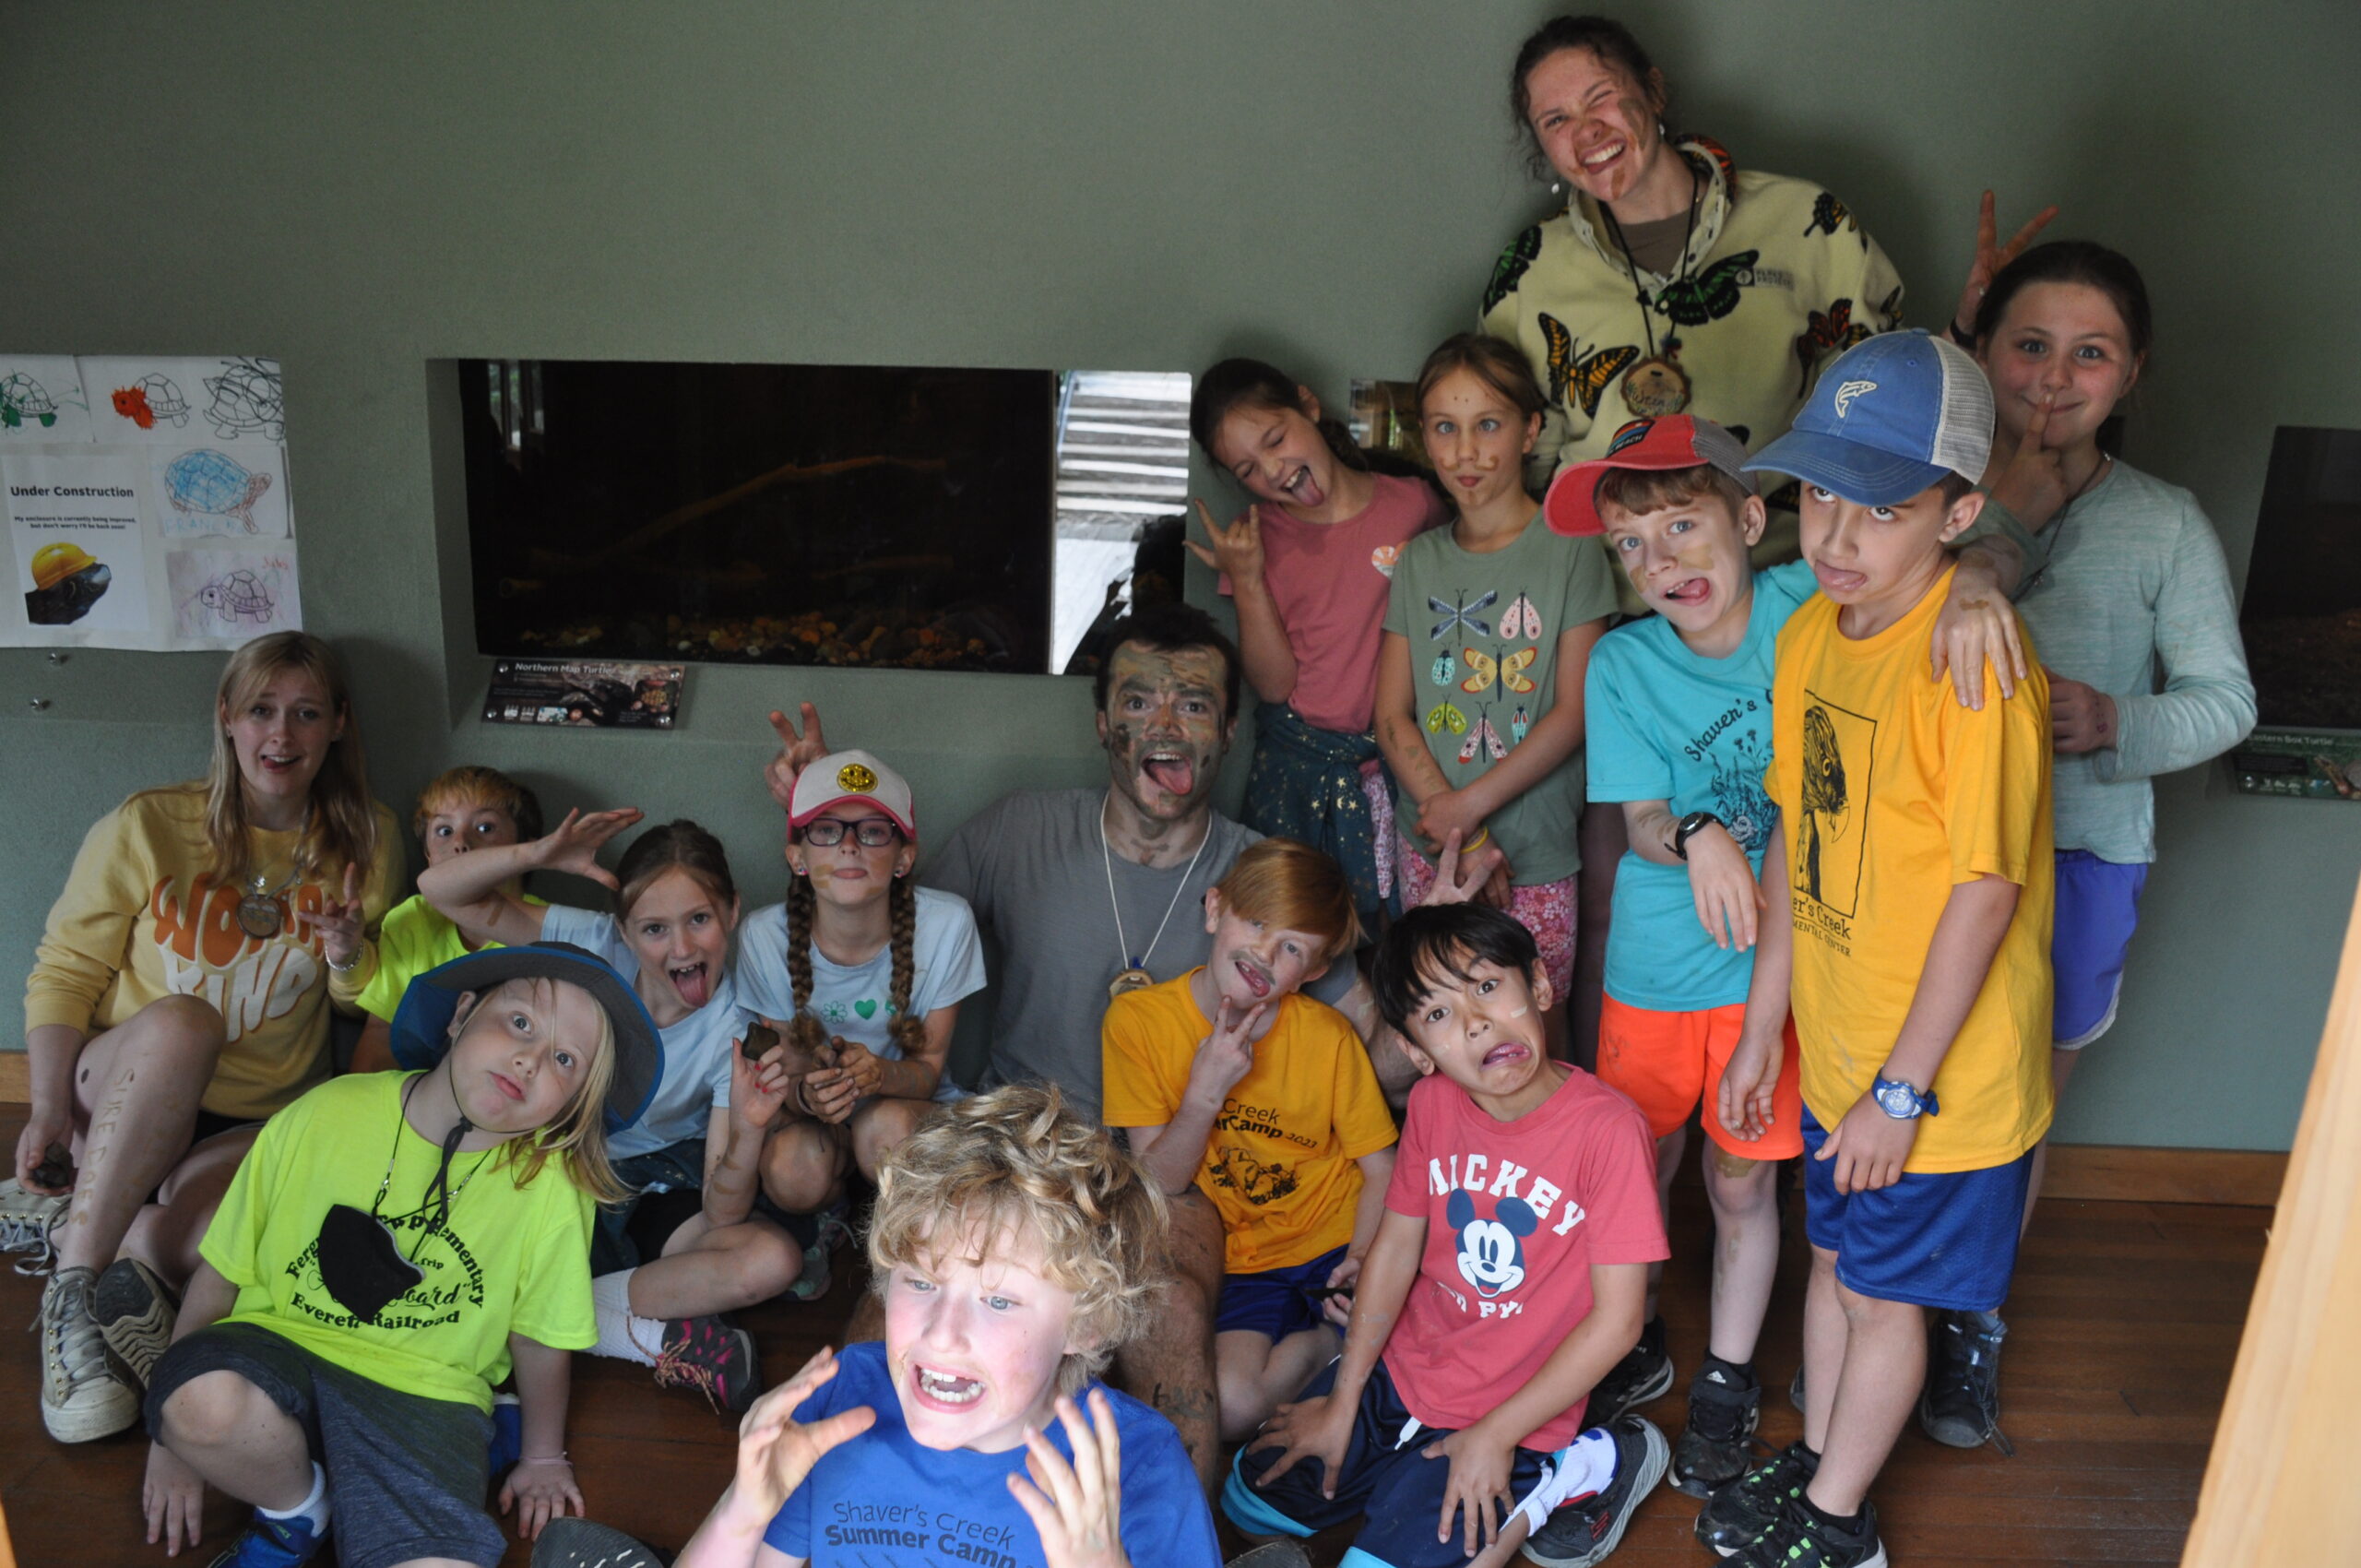 A group of summer campers make silly faces while posing for a picture.